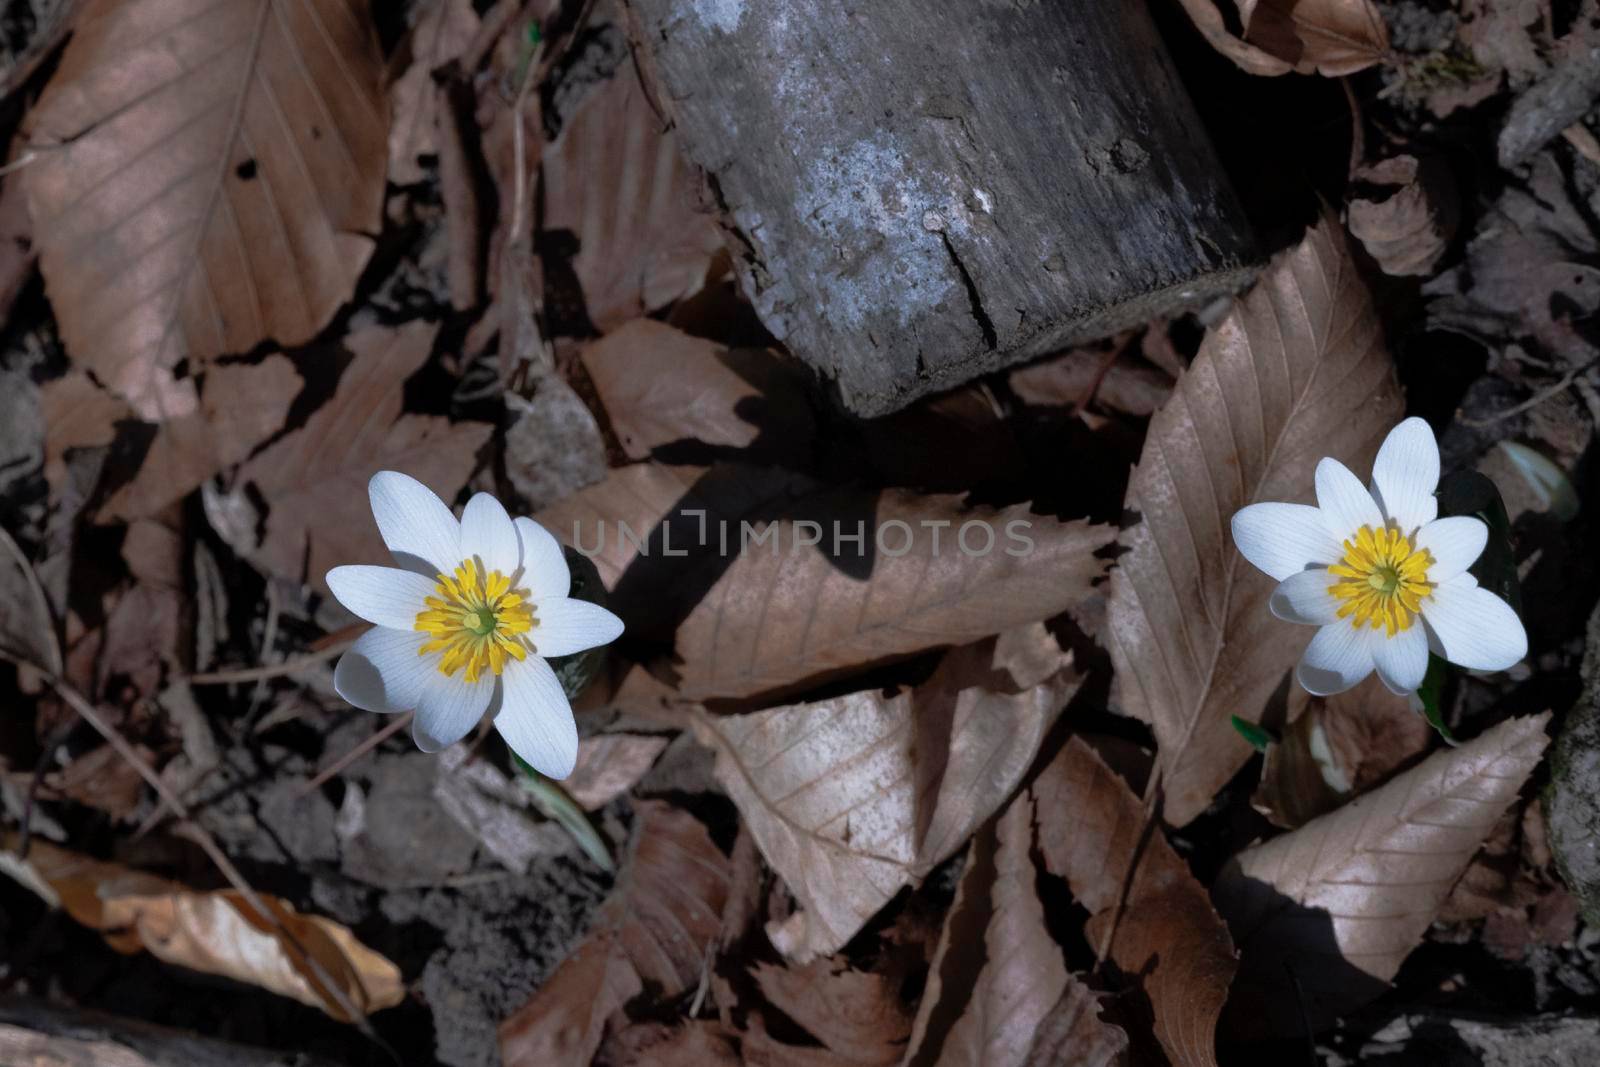 The first forest flowers made their way through last year's foliage by ben44